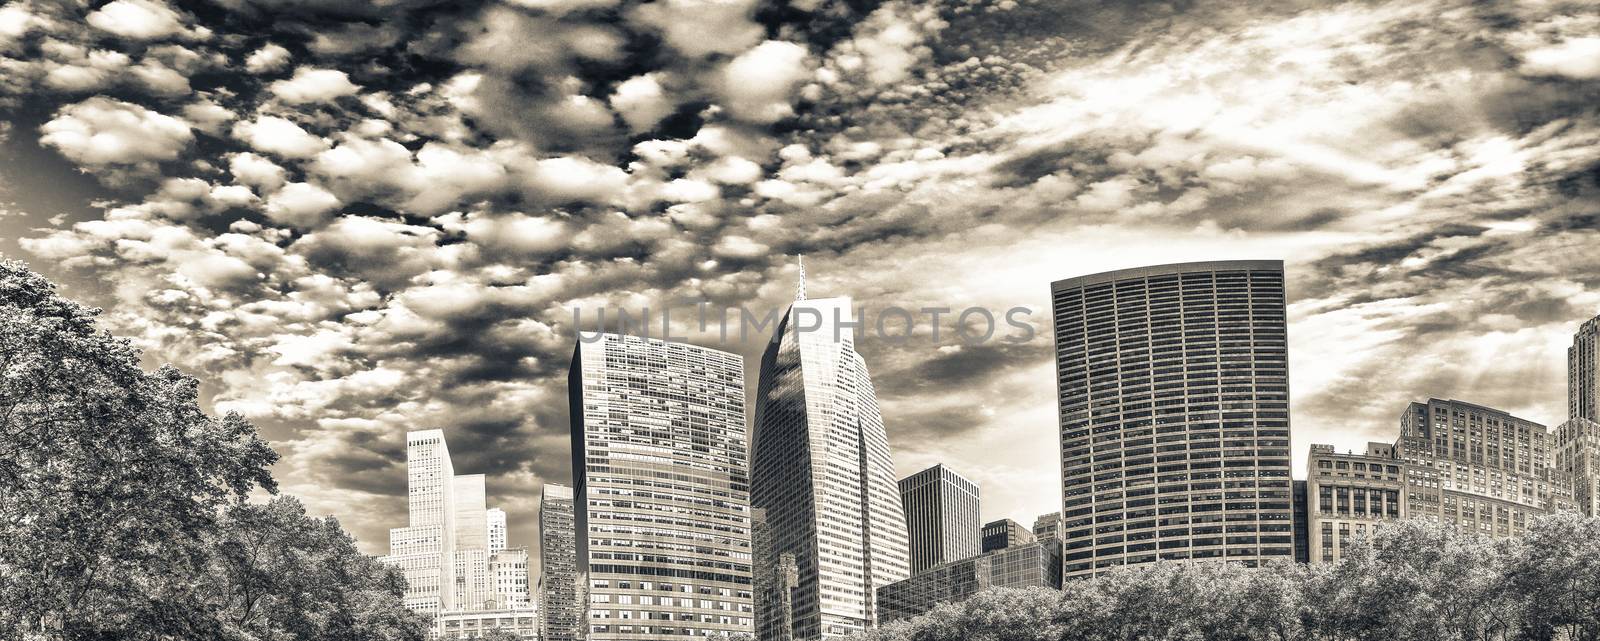 Tall skyscrapers over Bryant Park trees, Manhattan - New York Ci by jovannig